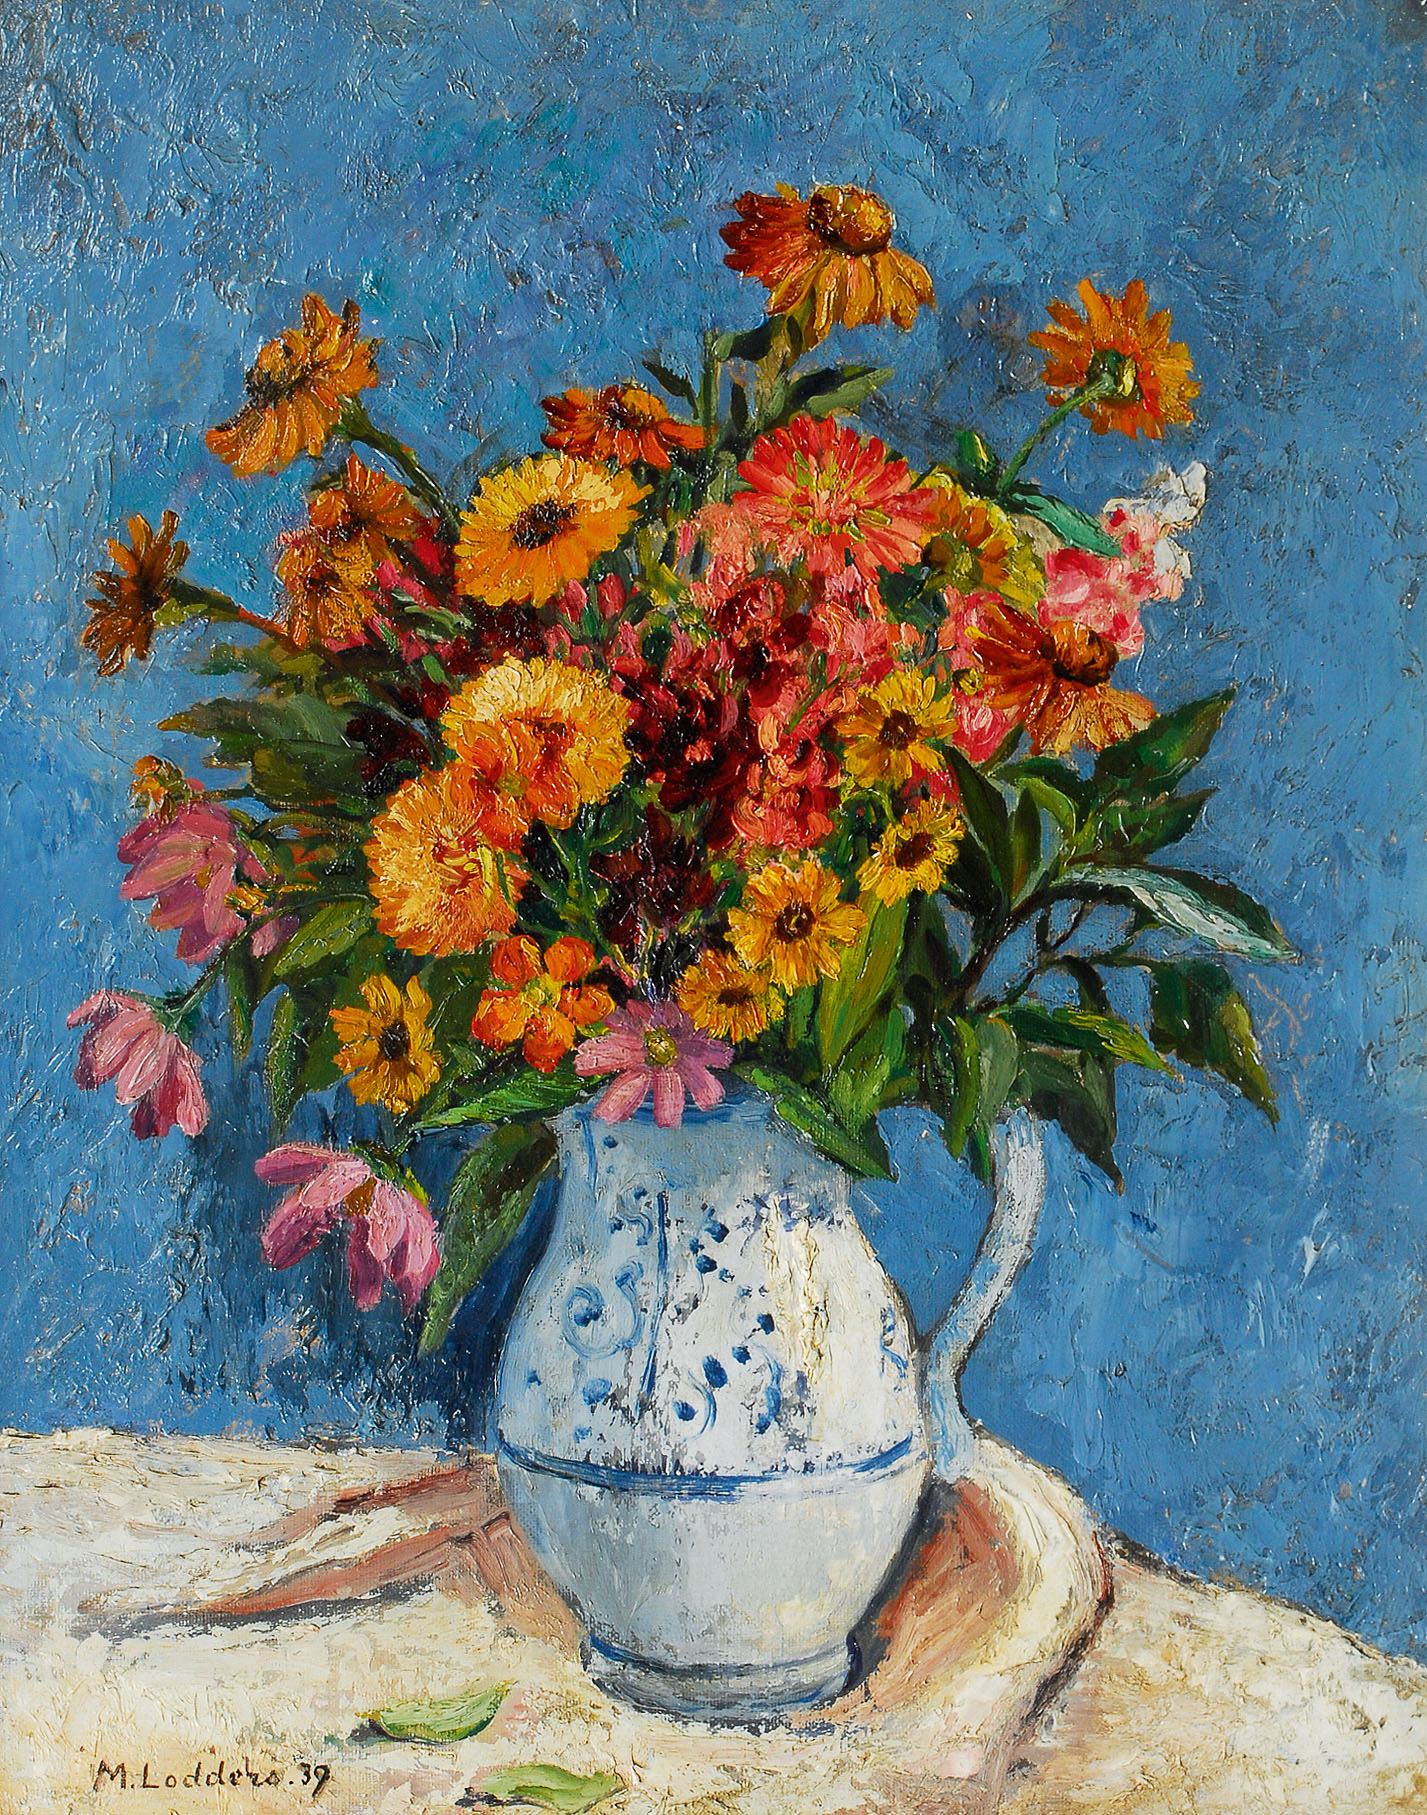 A jug with flowers